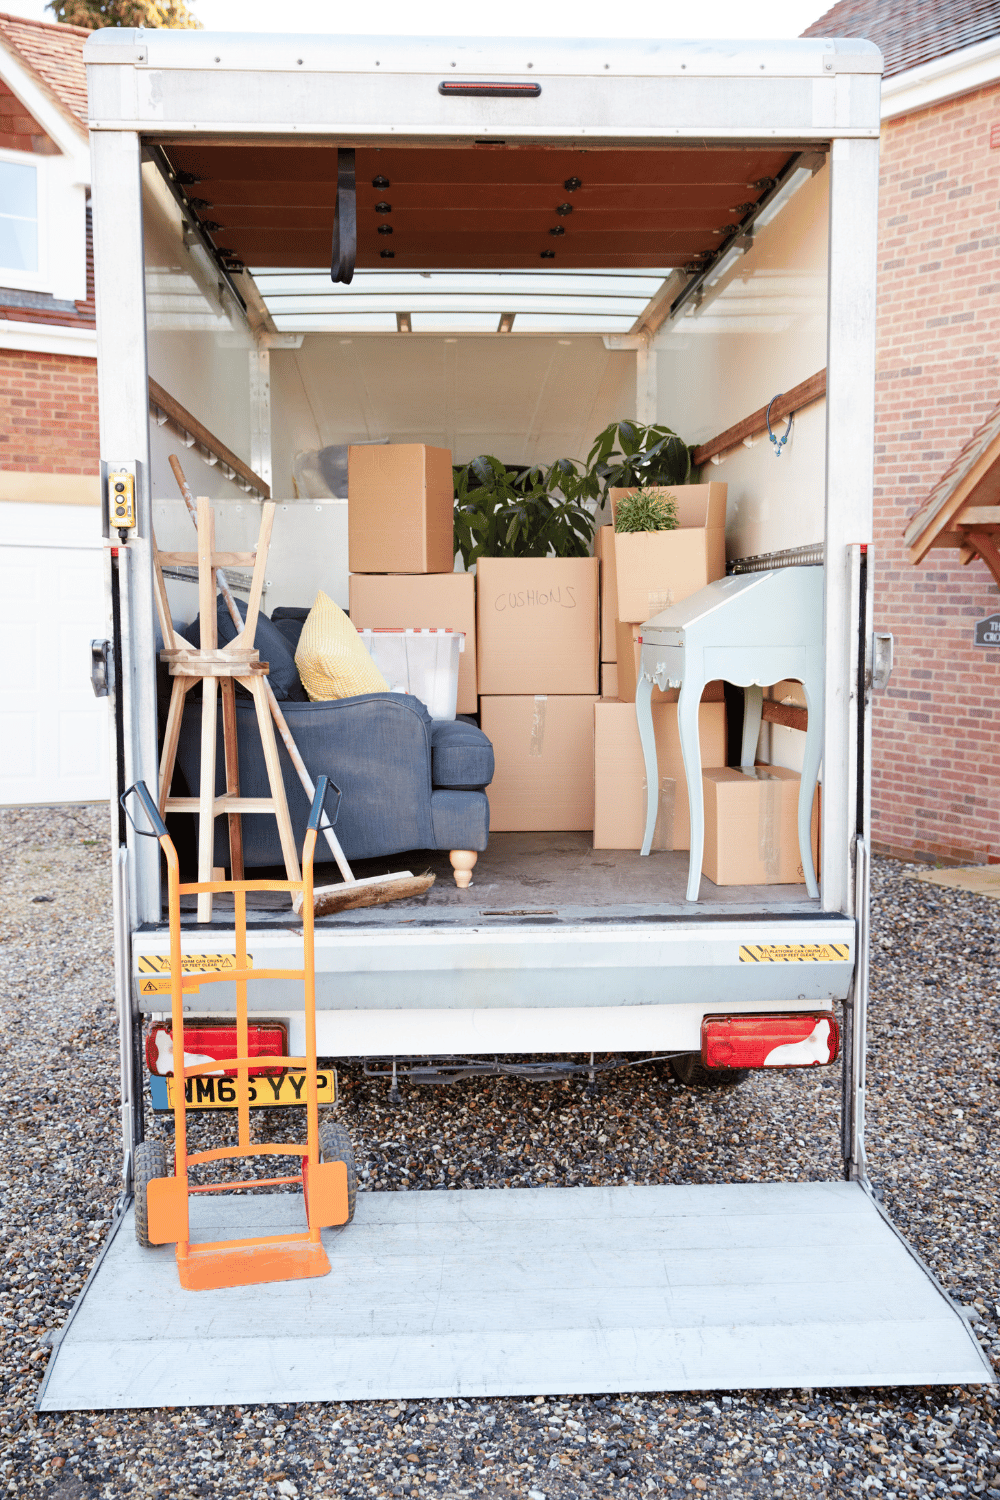 Important Factors to Consider When Choosing a Moving Company